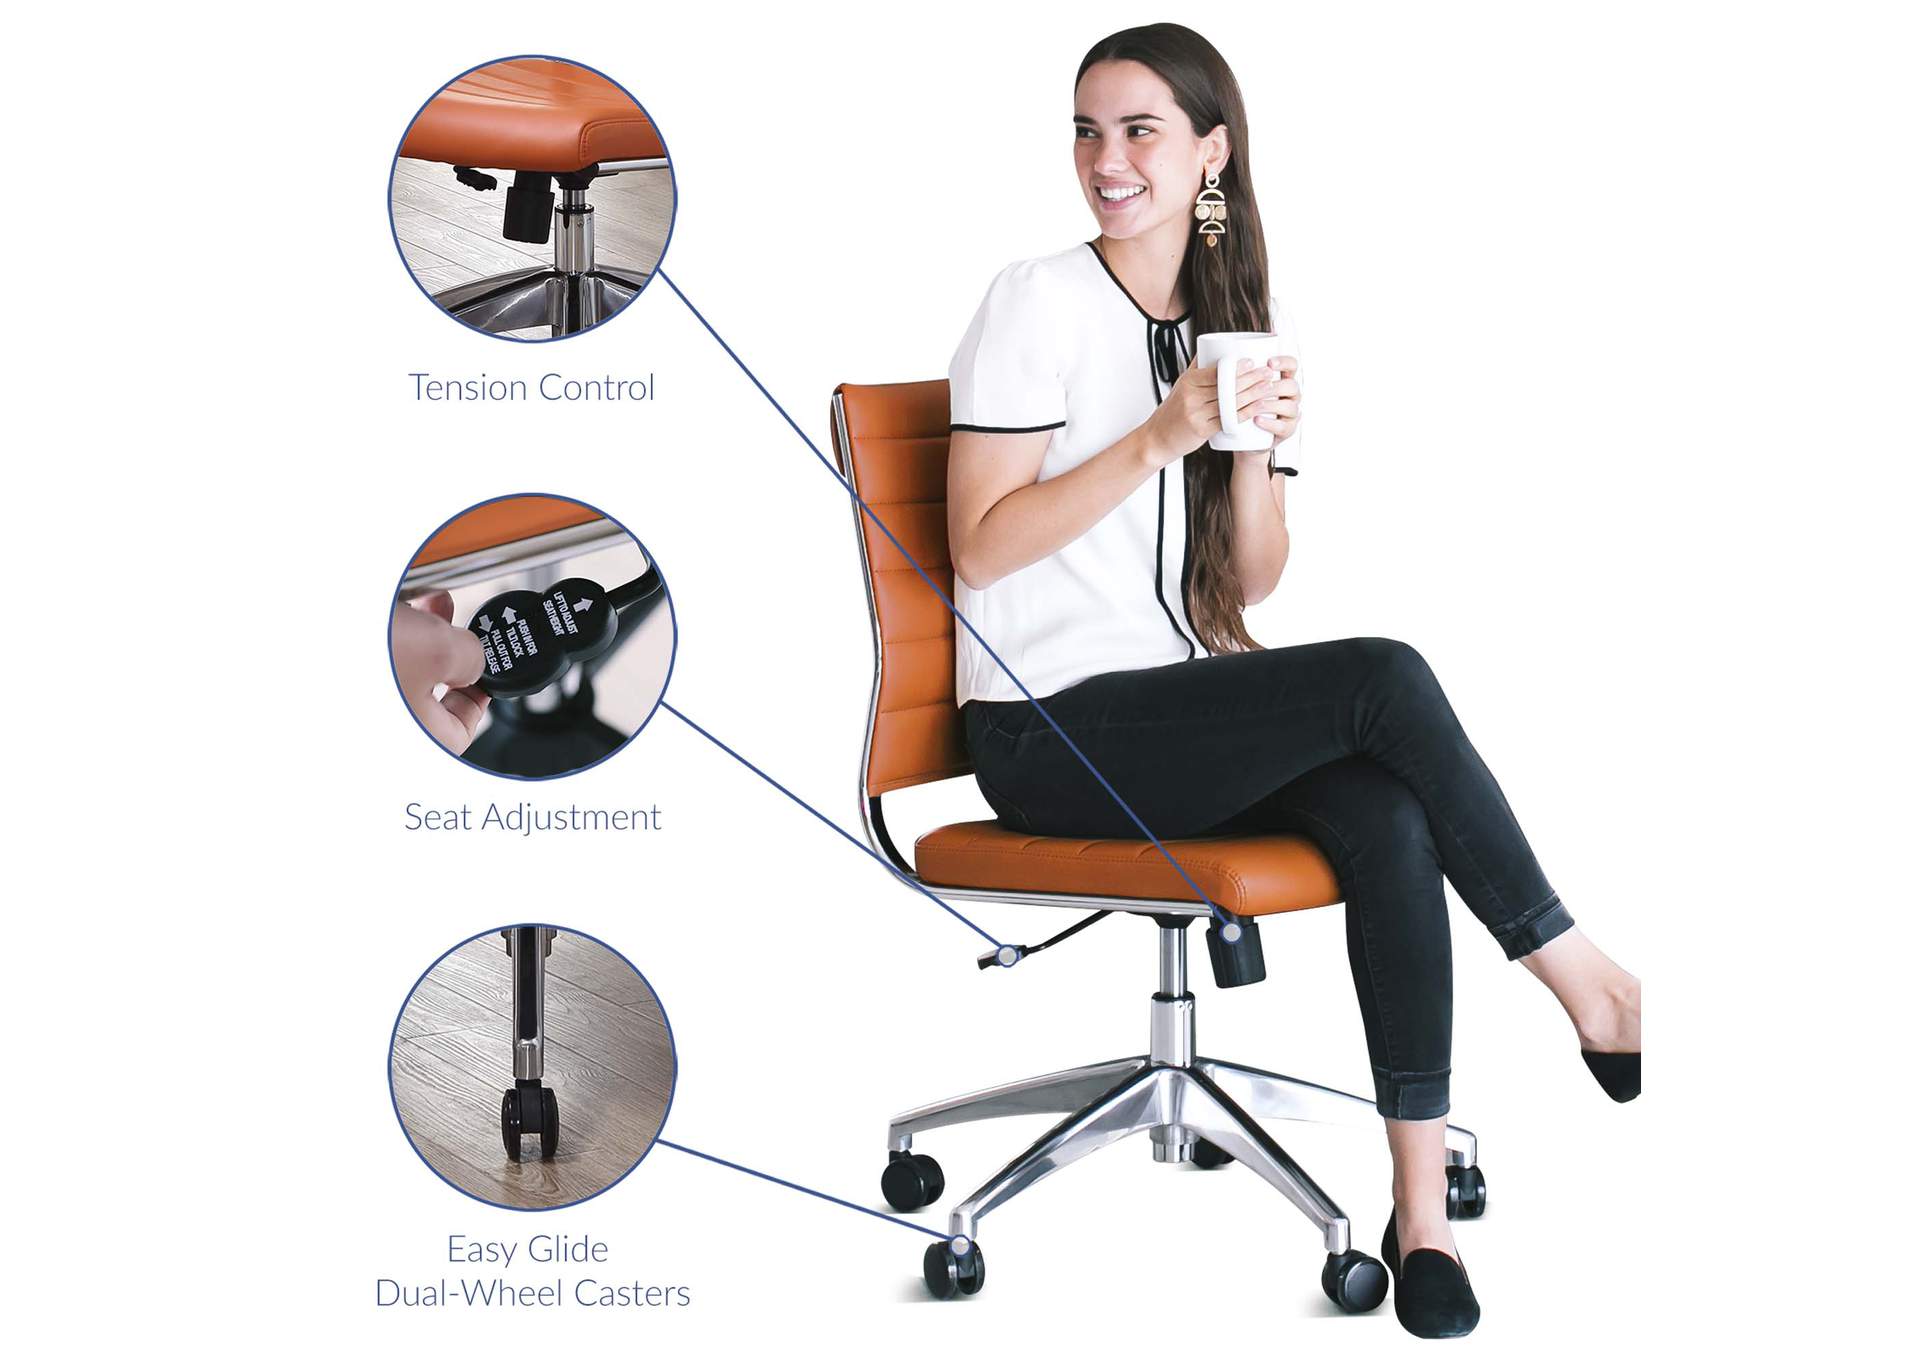 Jive Orange Armless Mid Back Office Chair,Modway